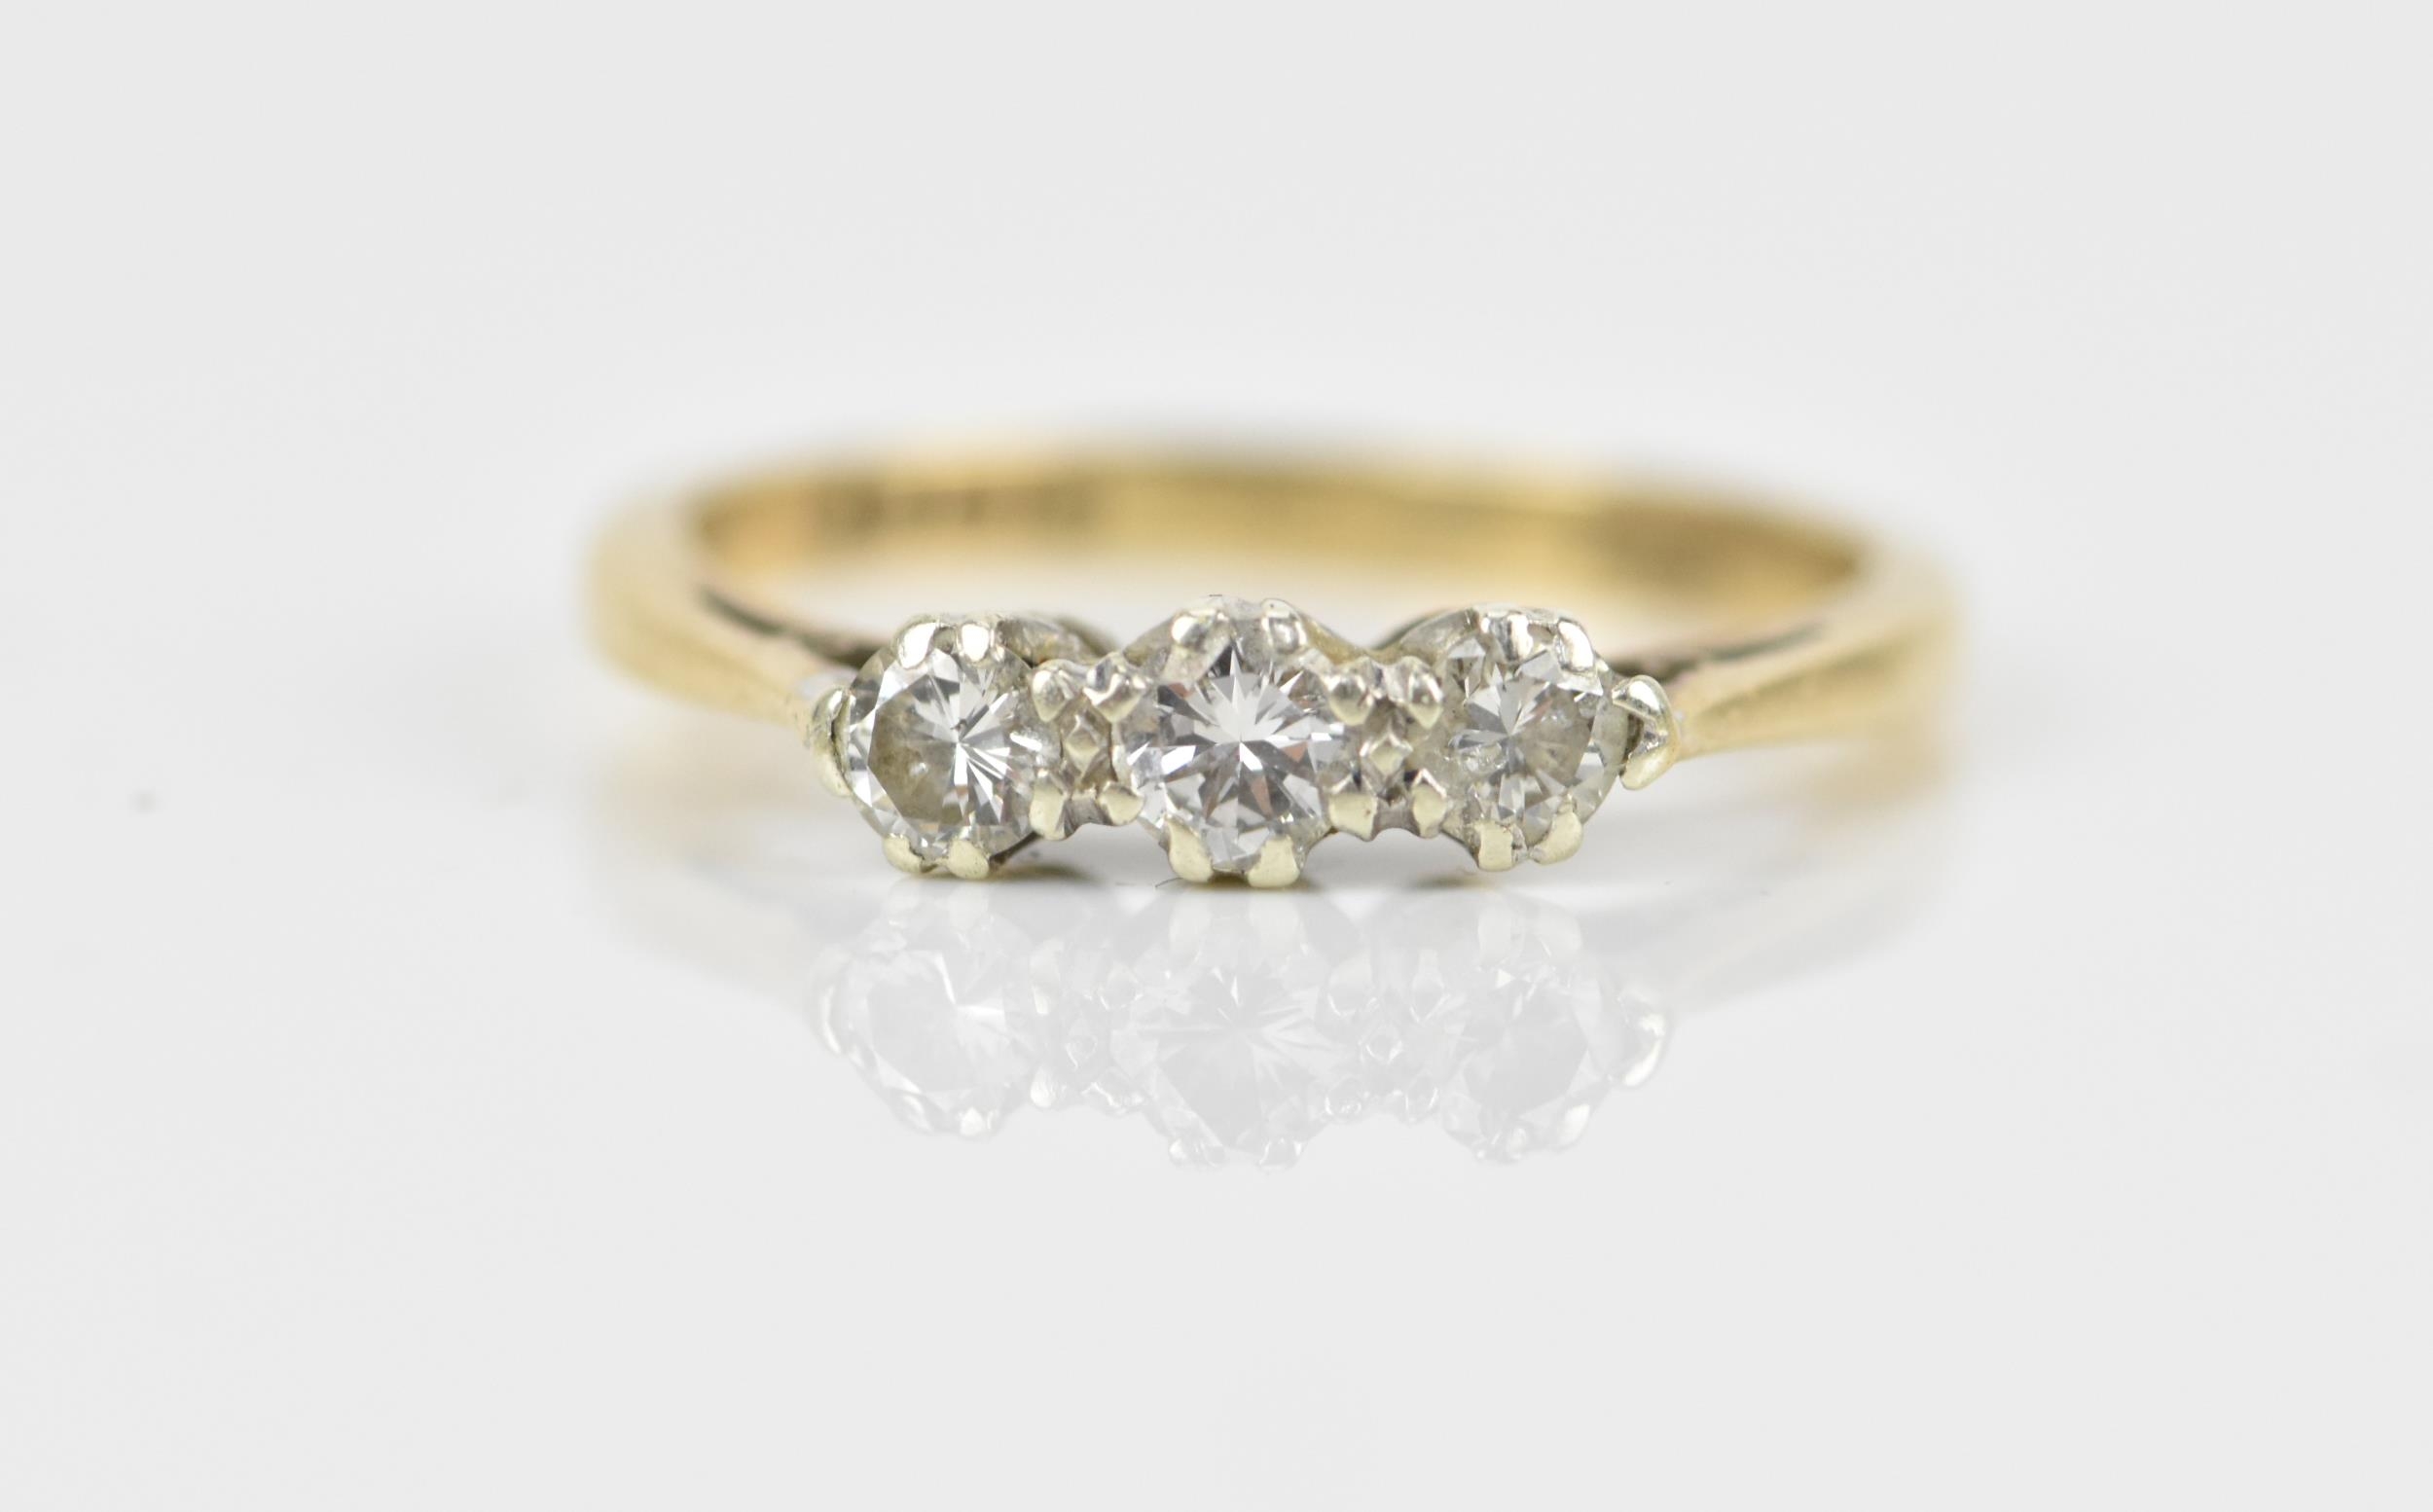 A 9ct yellow gold and three stone diamond ring, all three brilliant stones set in white metal with